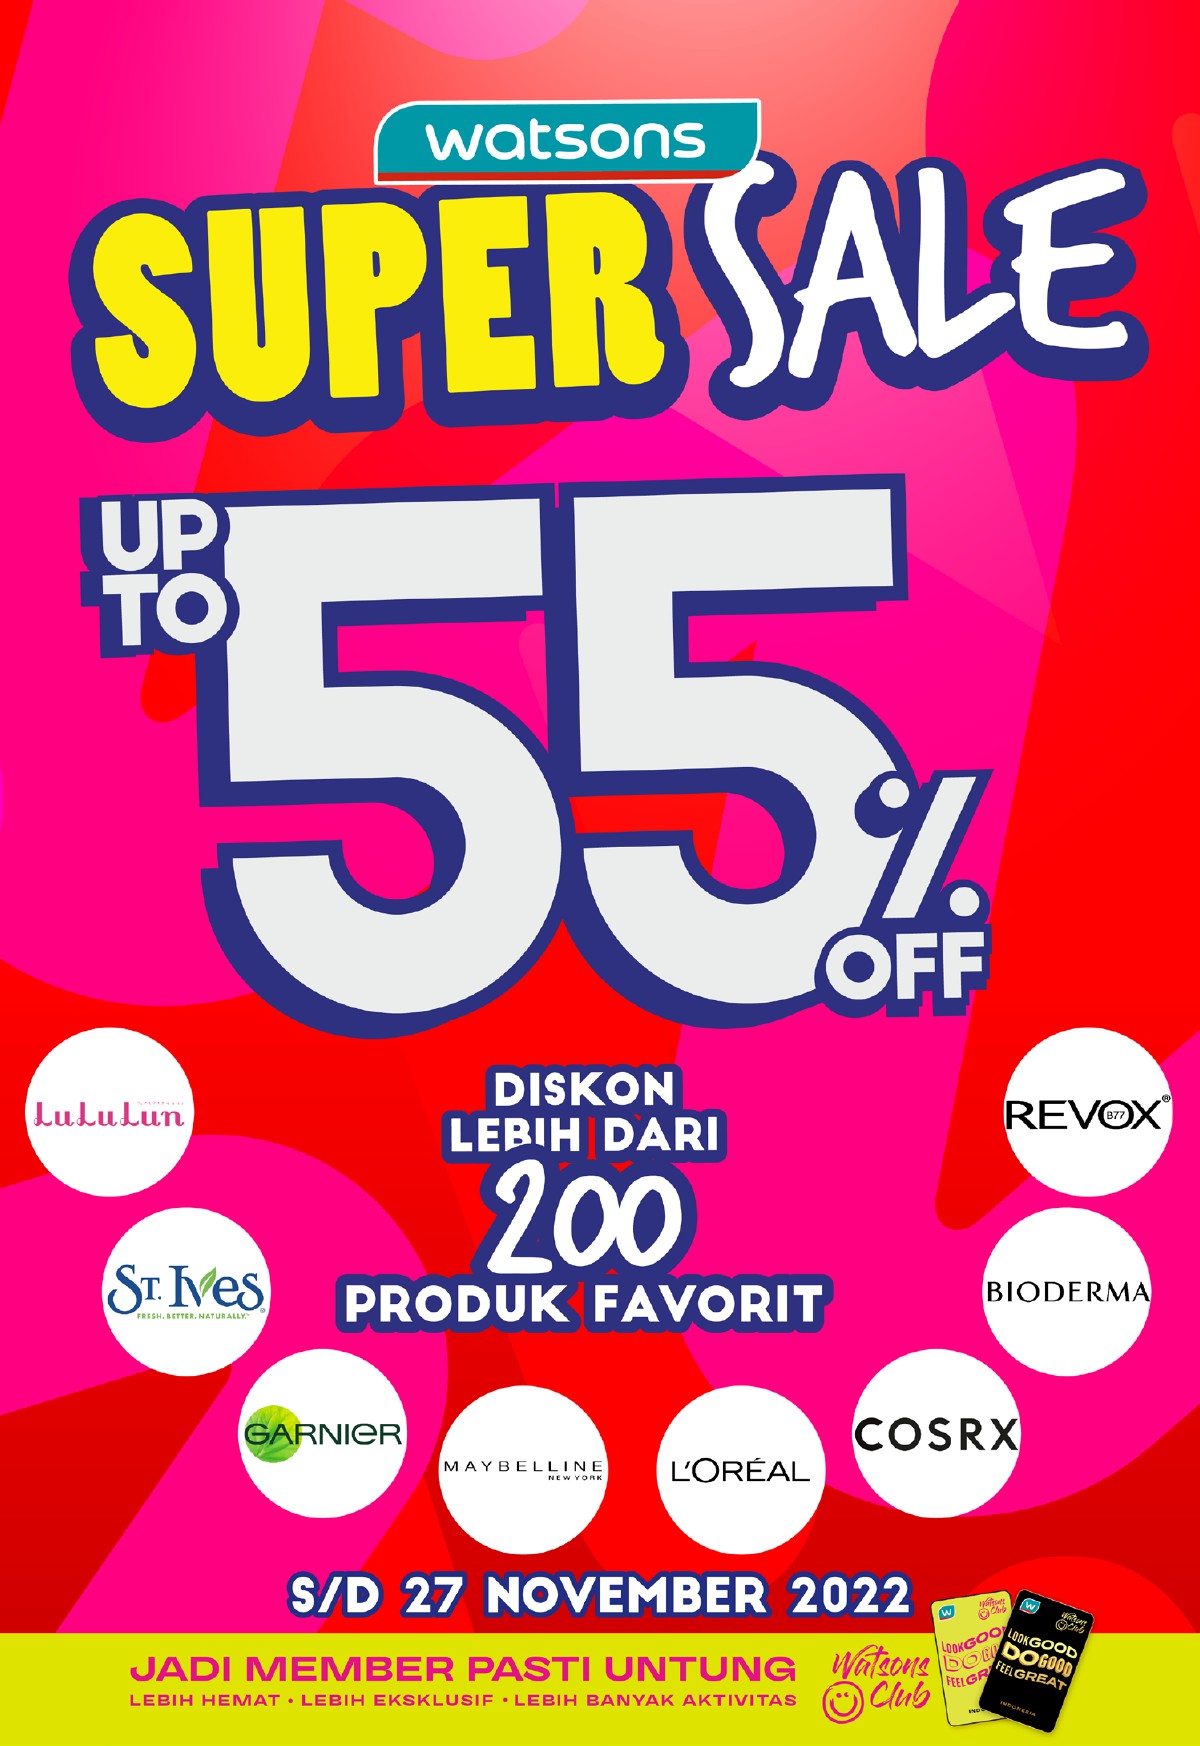 Promo WATSONS WEEKEND SUPER SPESIAL SALE up to 55% off - periode 24-27 NOVEMBER 2022